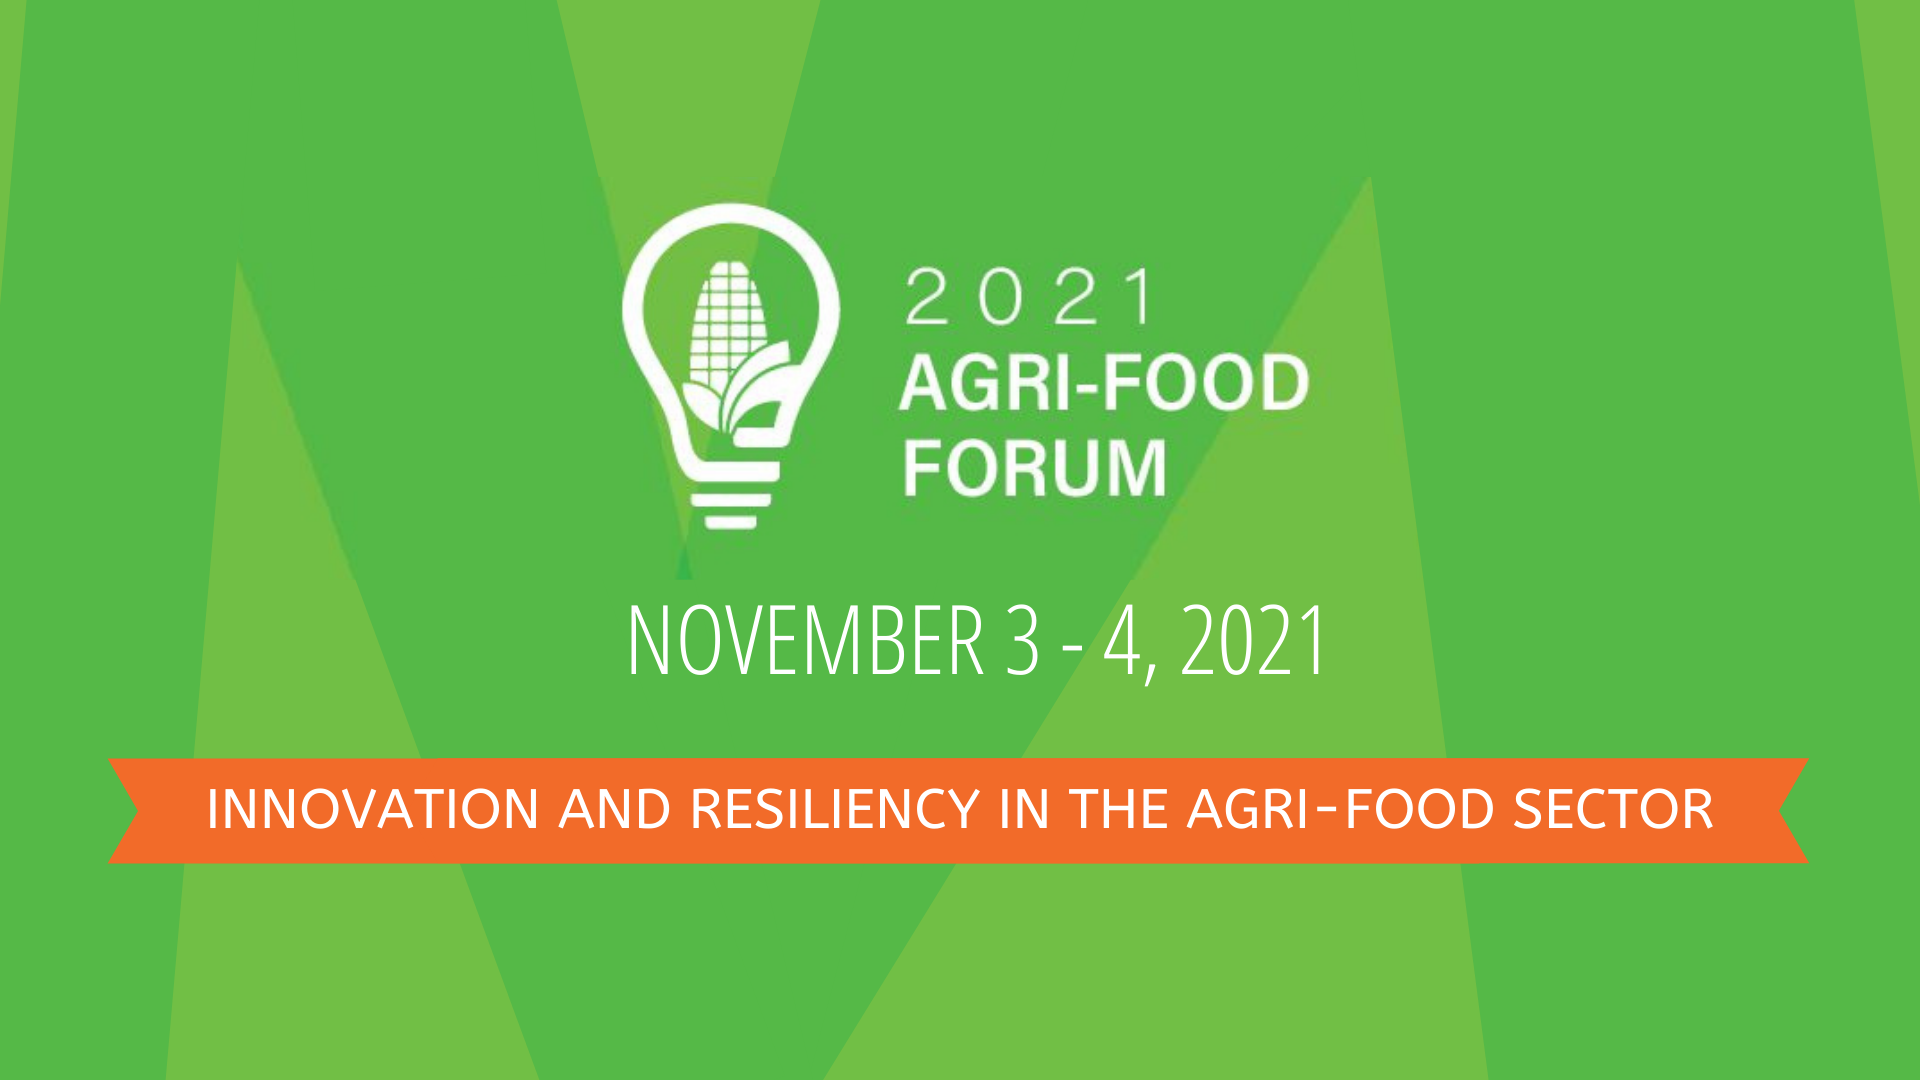 Register today for the Agri-Food Forum 2021 – Innovation and Resiliency in the Agri-Food Sector